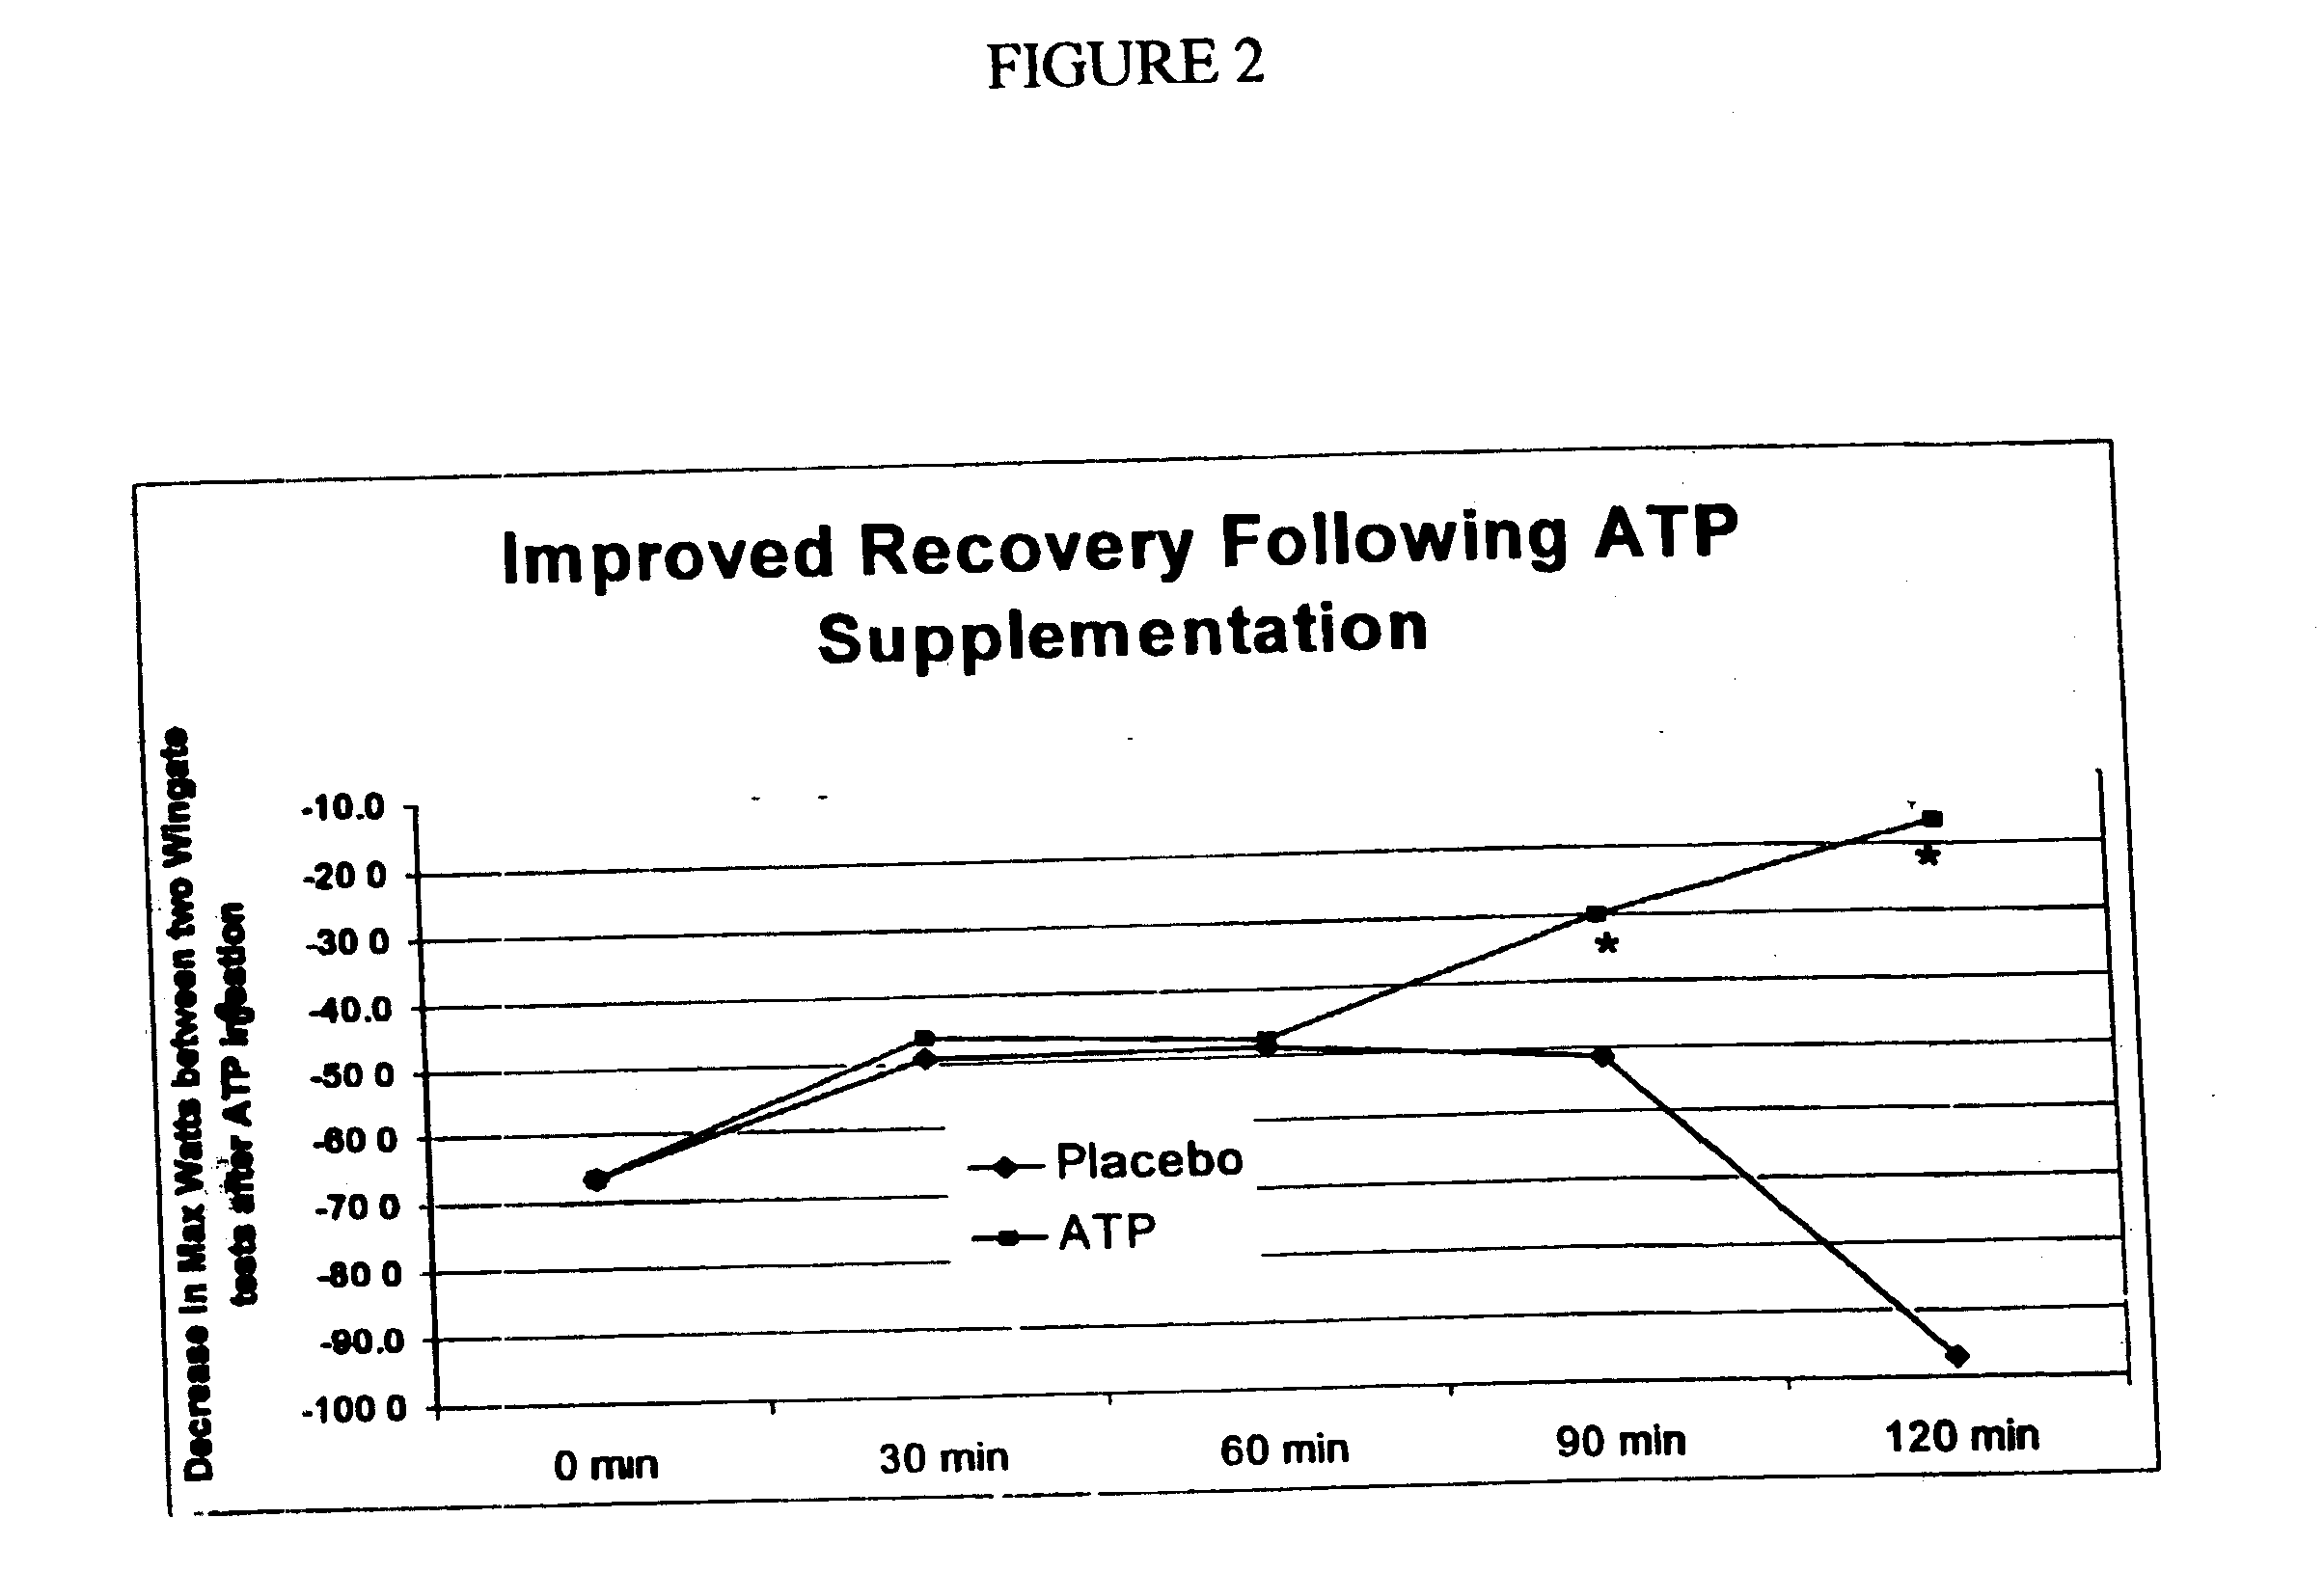 Method for increasing human performance by reducing muscle fatigue and recovery time through oral administration of adenosine triphosphate